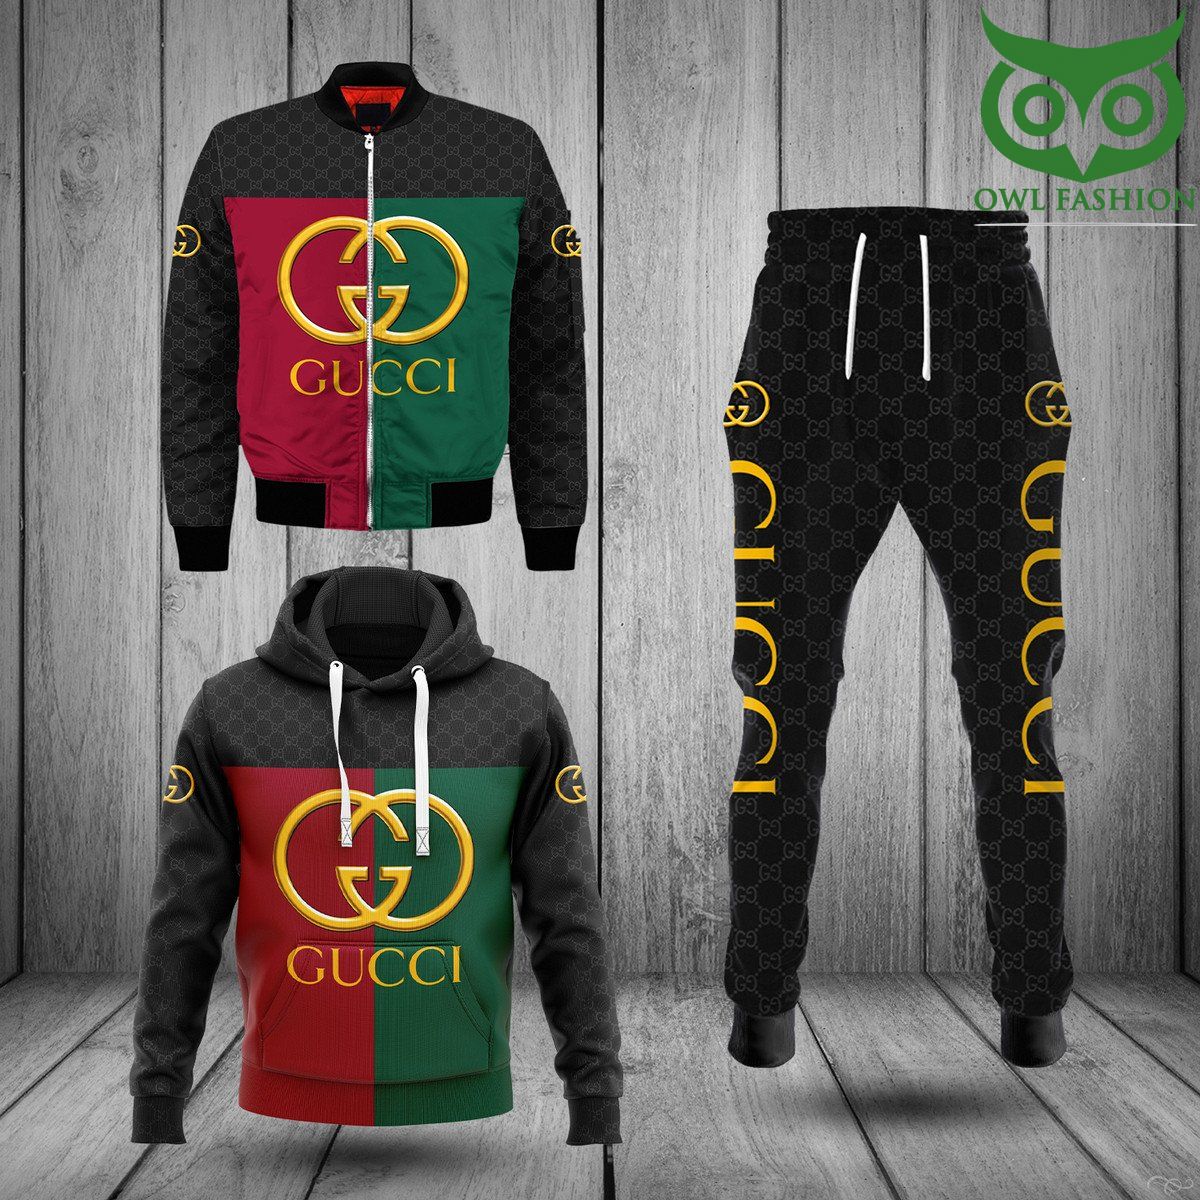 80 Gucci big golden logo red green Fashion Bomber Jacket Hoodie and Pants